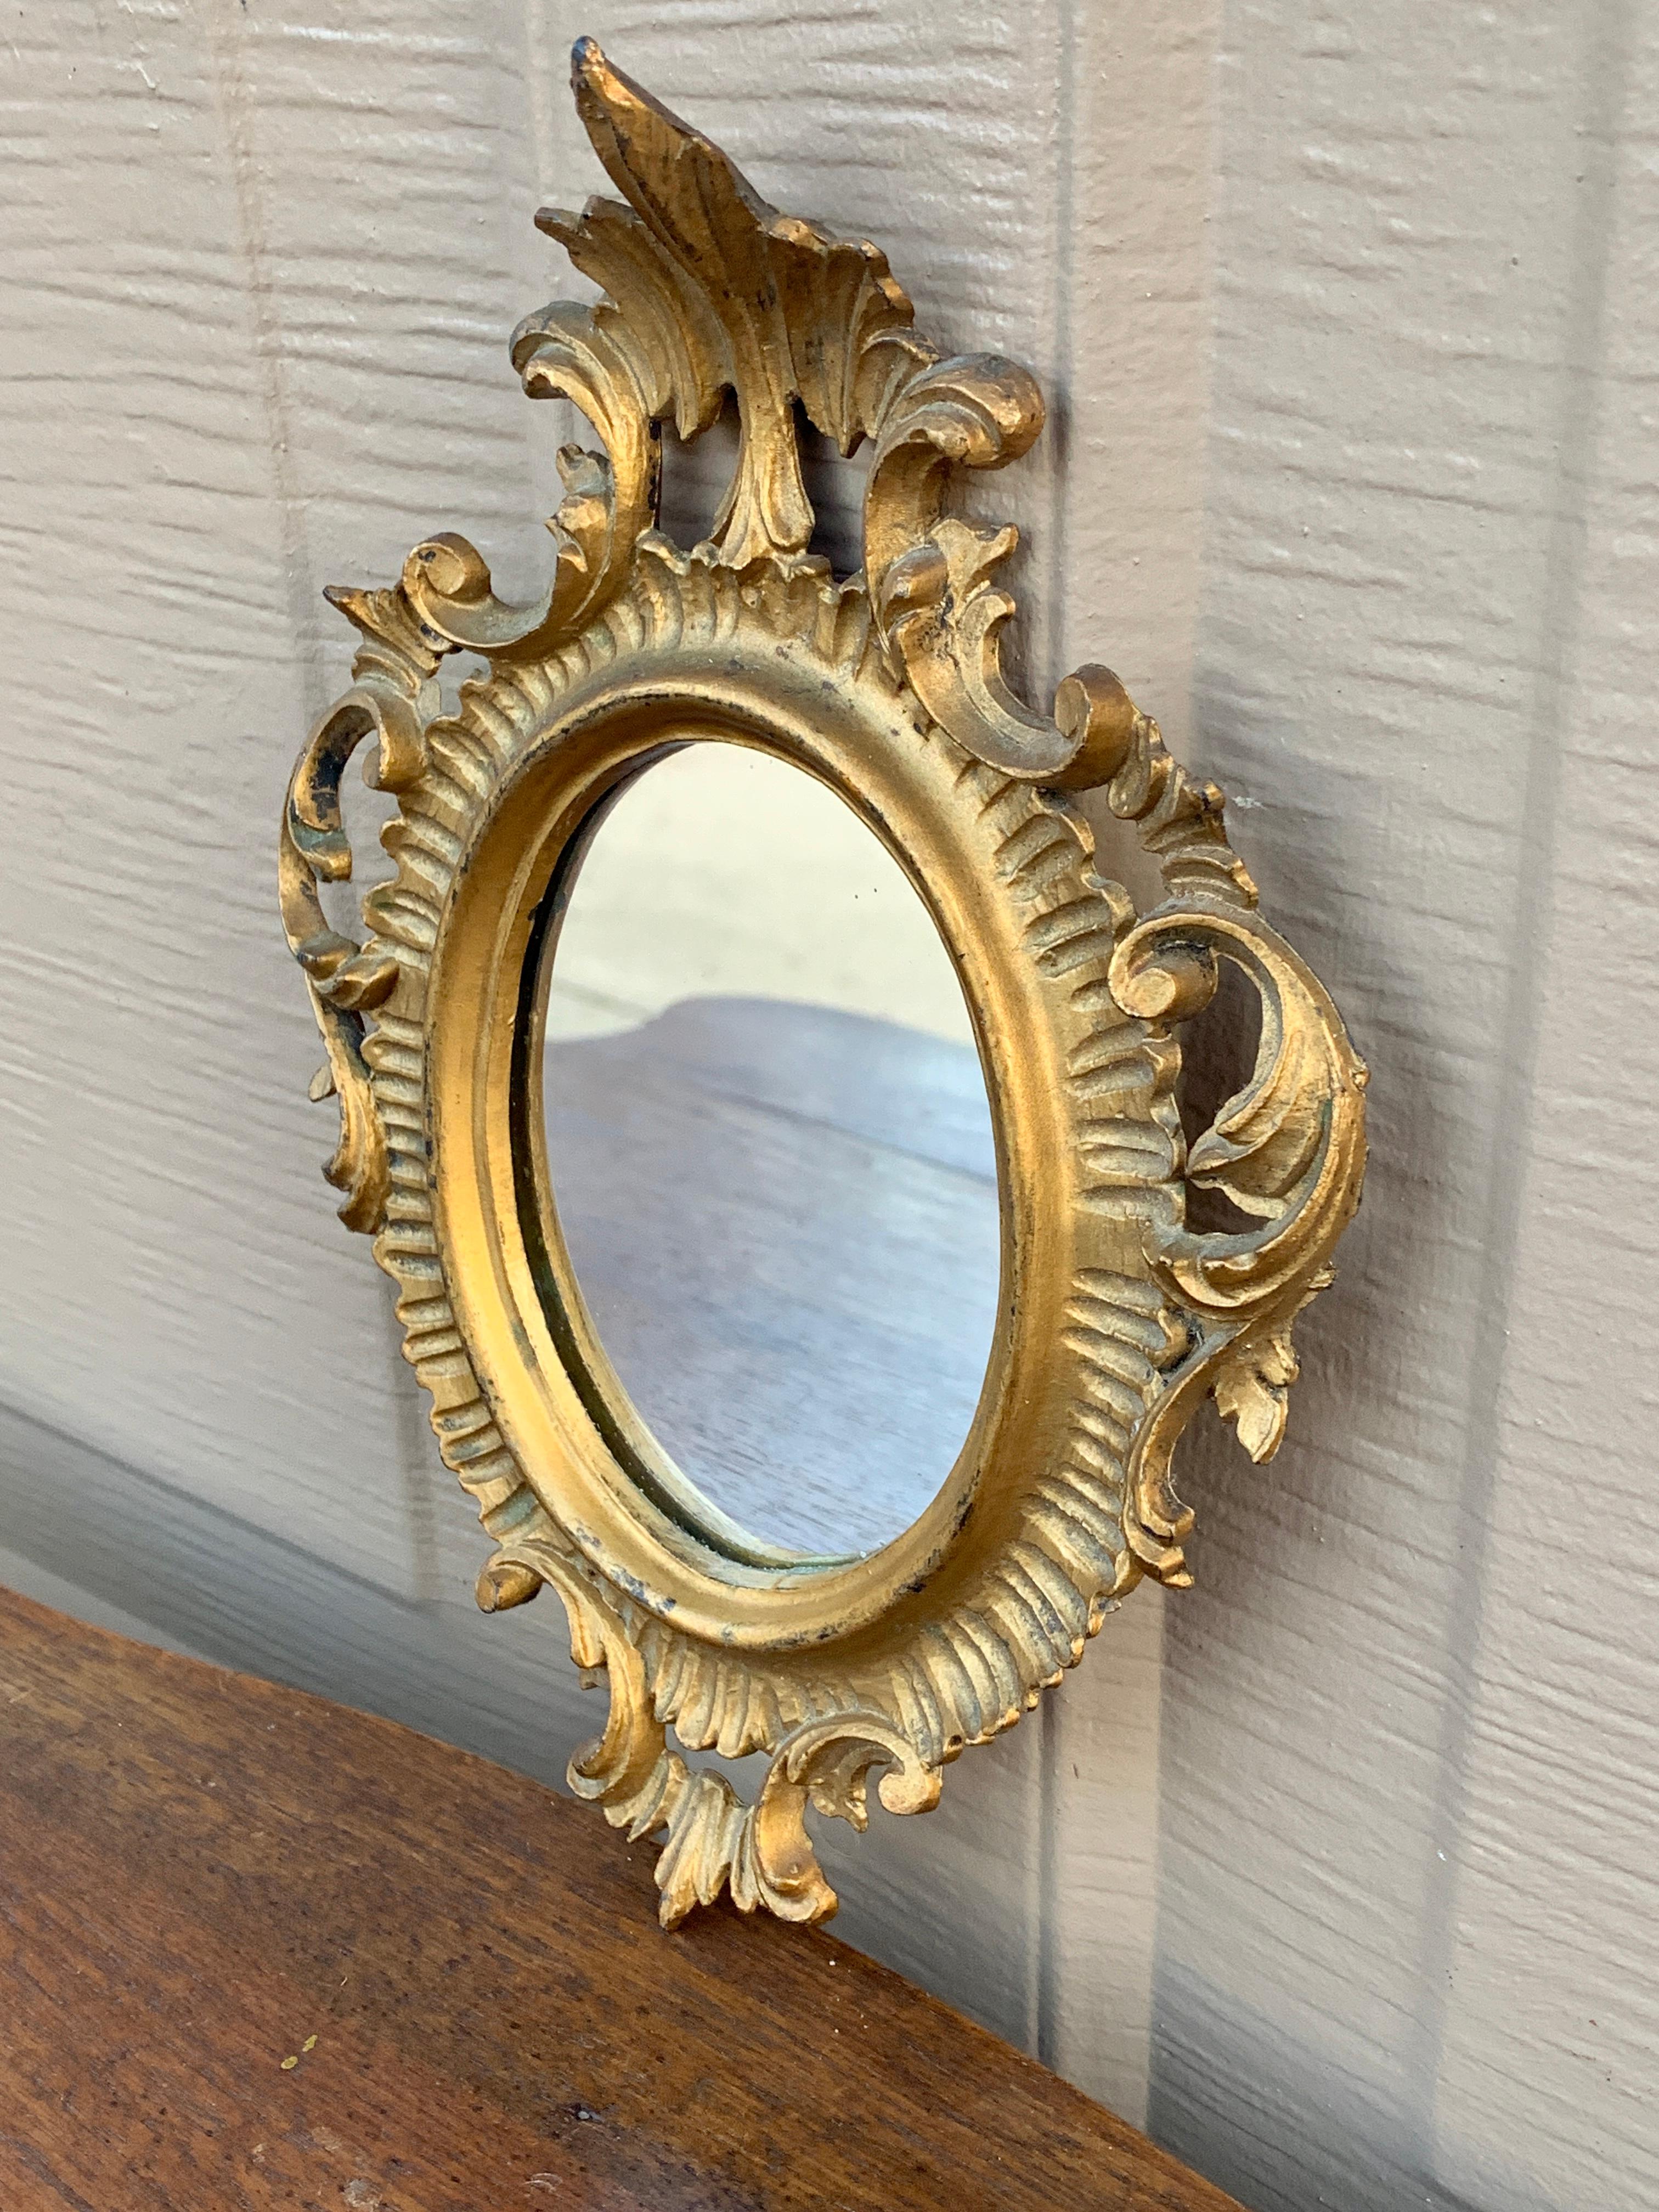 A stunning Italian Florentine baroque rococo style wall mirror

Italy, Circa 1960s

Gold gilt wood, with mirror.

Measures: 6